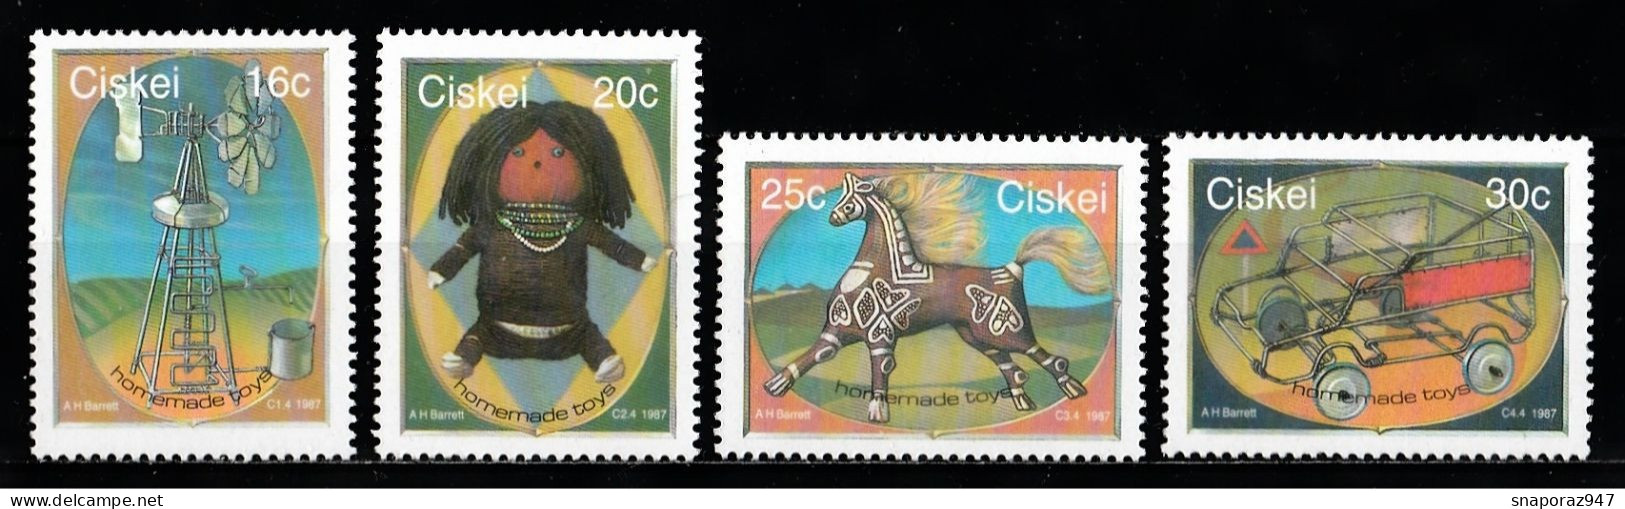 1987 Ciskei Handcrafted Toys Set MNH** Ab236 - Puppen